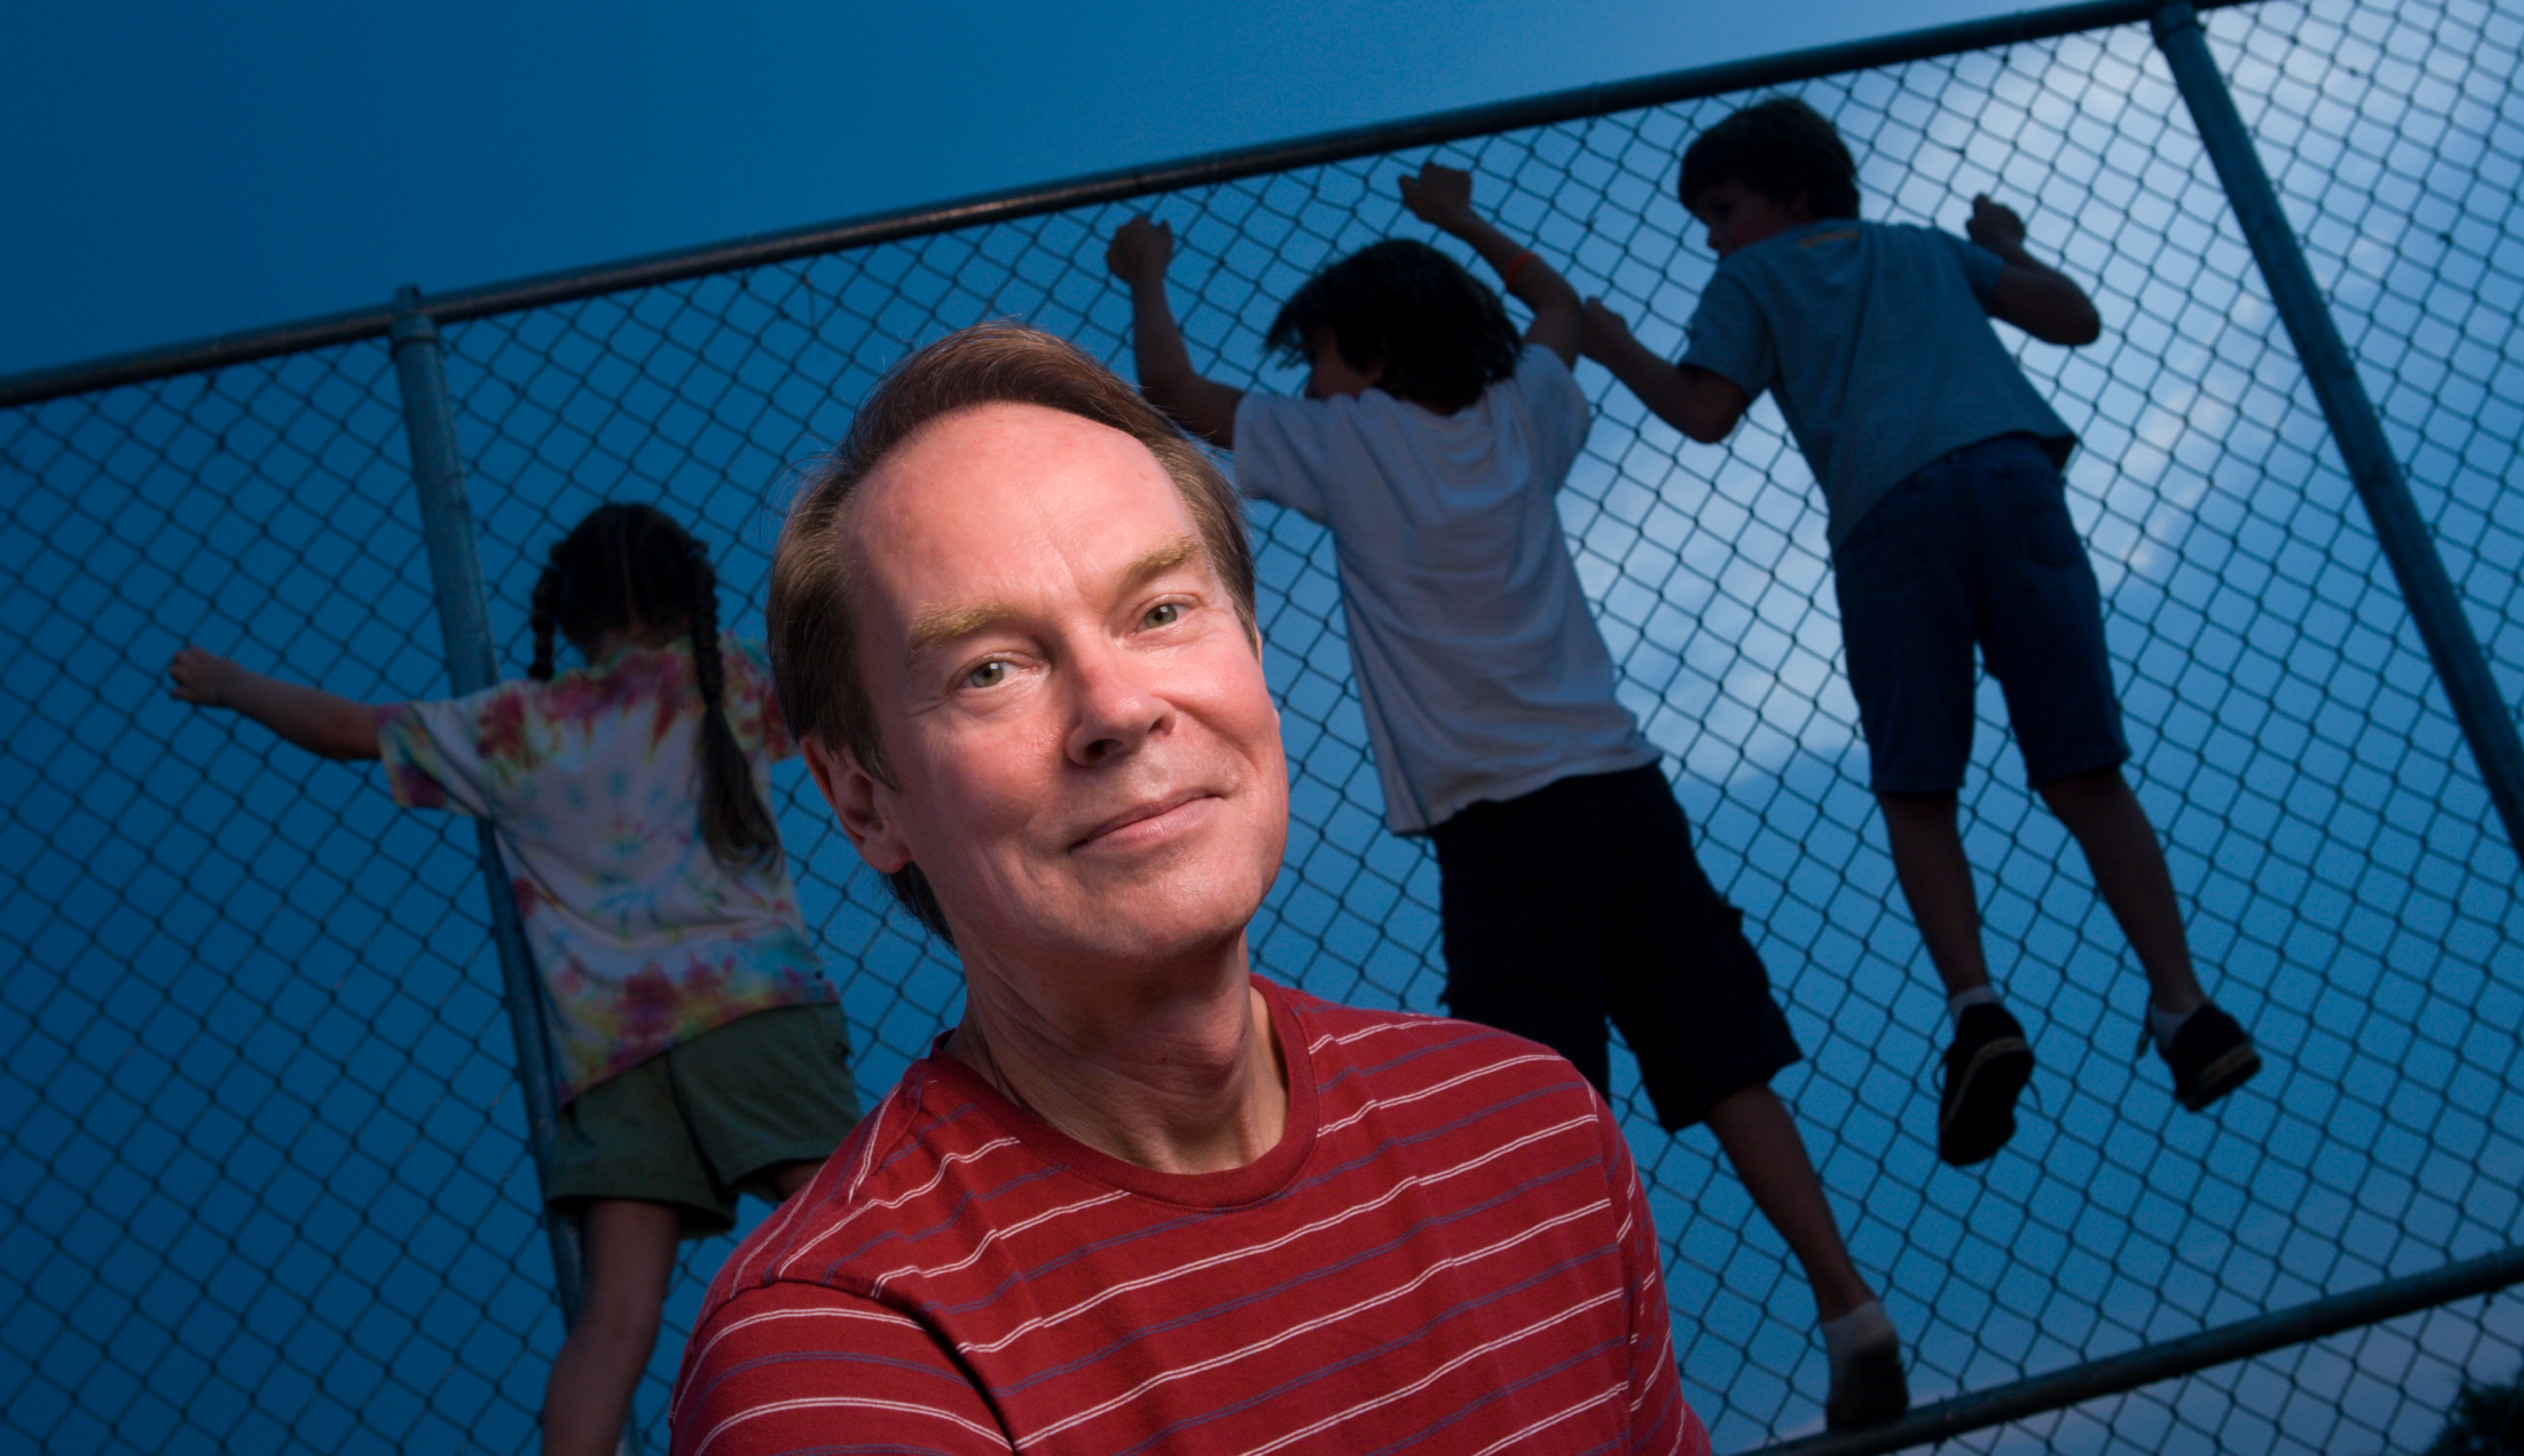 Ron Simons faces camera while three children climb a fence behind him